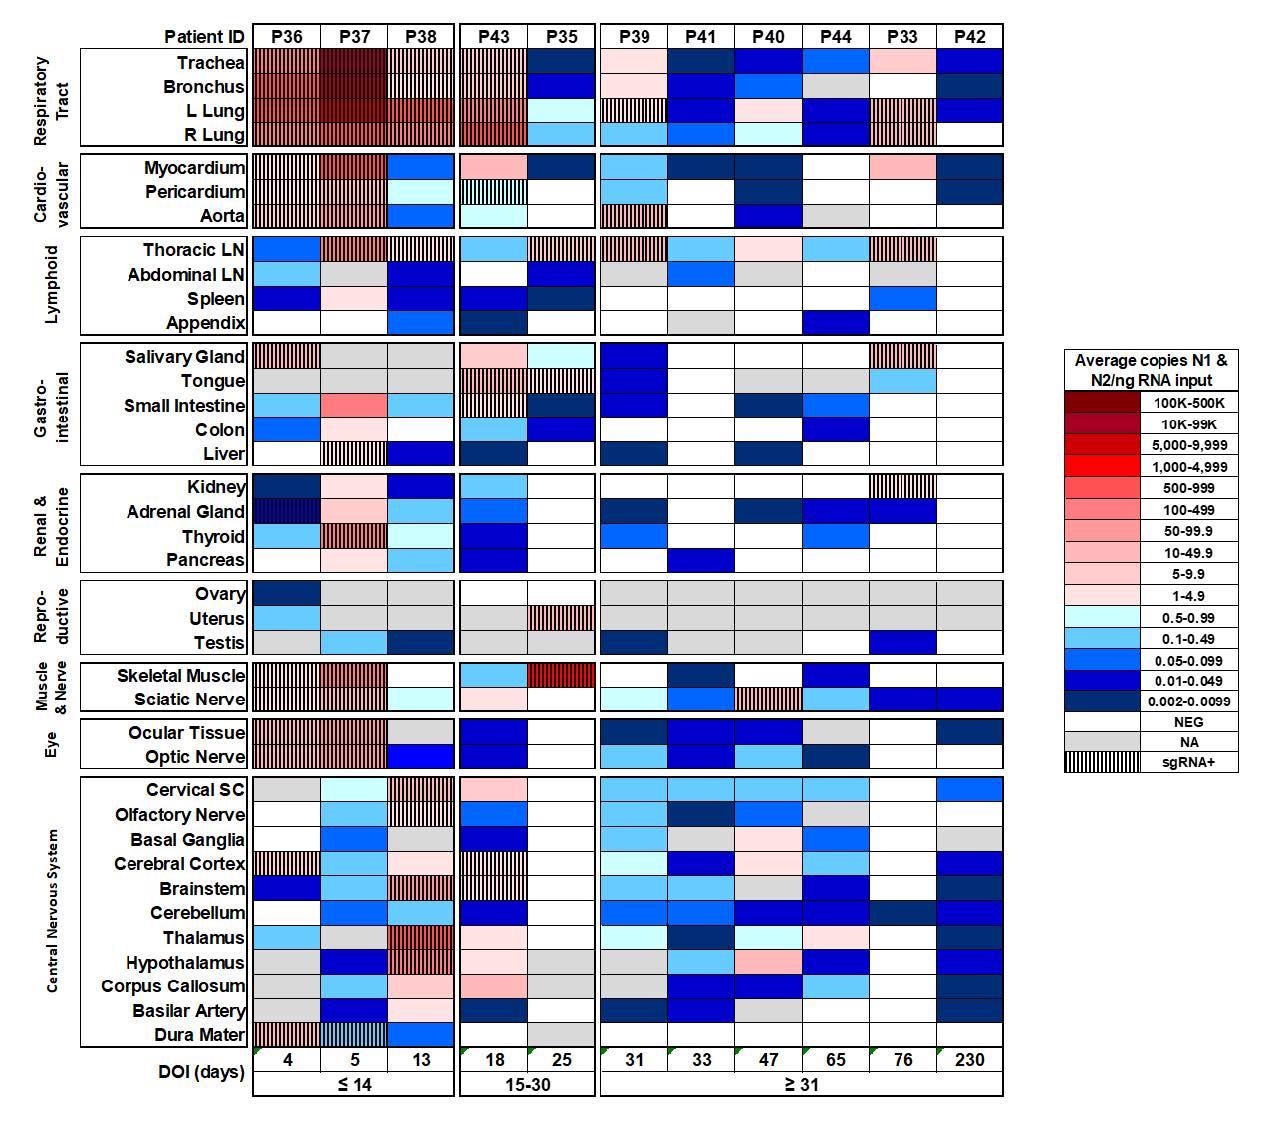 Distribution, quantification, and replication of SARS-Cov-2 across the human body and brain. The heat map depicts the highest mean quantification of SARS-CoV-2 RNA (N) via ddPCR present within the tissues of eleven COVID-19 autopsy patients who underwent whole body and brain sampling. Patients are aligned from shortest to longest duration of illness (DOI) prior to death, listed at the bottom of the figure, and grouped into early (≤14 days), mid (15-30 days), and late (≥31 days) DOI. Tissues are grouped by tissue category beginning with the respiratory tract at the top and central nervous system at the bottom. Viral RNA levels range from 0.002 to 500,000 N gene copies per ng of RNA input, depicted as a gradient from dark blue at the lowest level to dark red at the highest level. Tissues that were also positive for sgRNA via real-time RT-PCR are shaded with black vertical bars. L/left, LN/lymph node, NA/not acquired, R/right, SC/spinal cord.